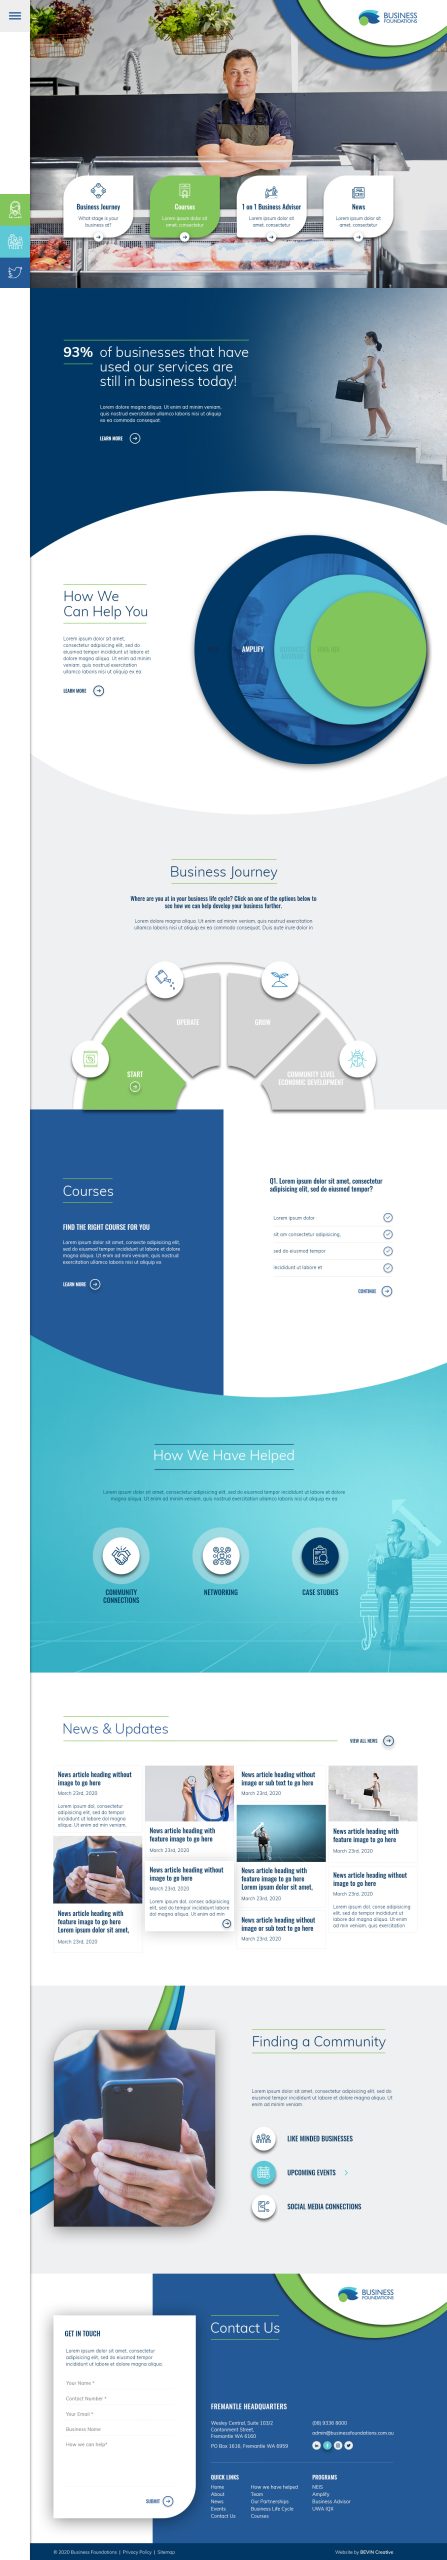 BEVIN CREATIVE – Business-Foundations_Website-Homepage_2020.04.23